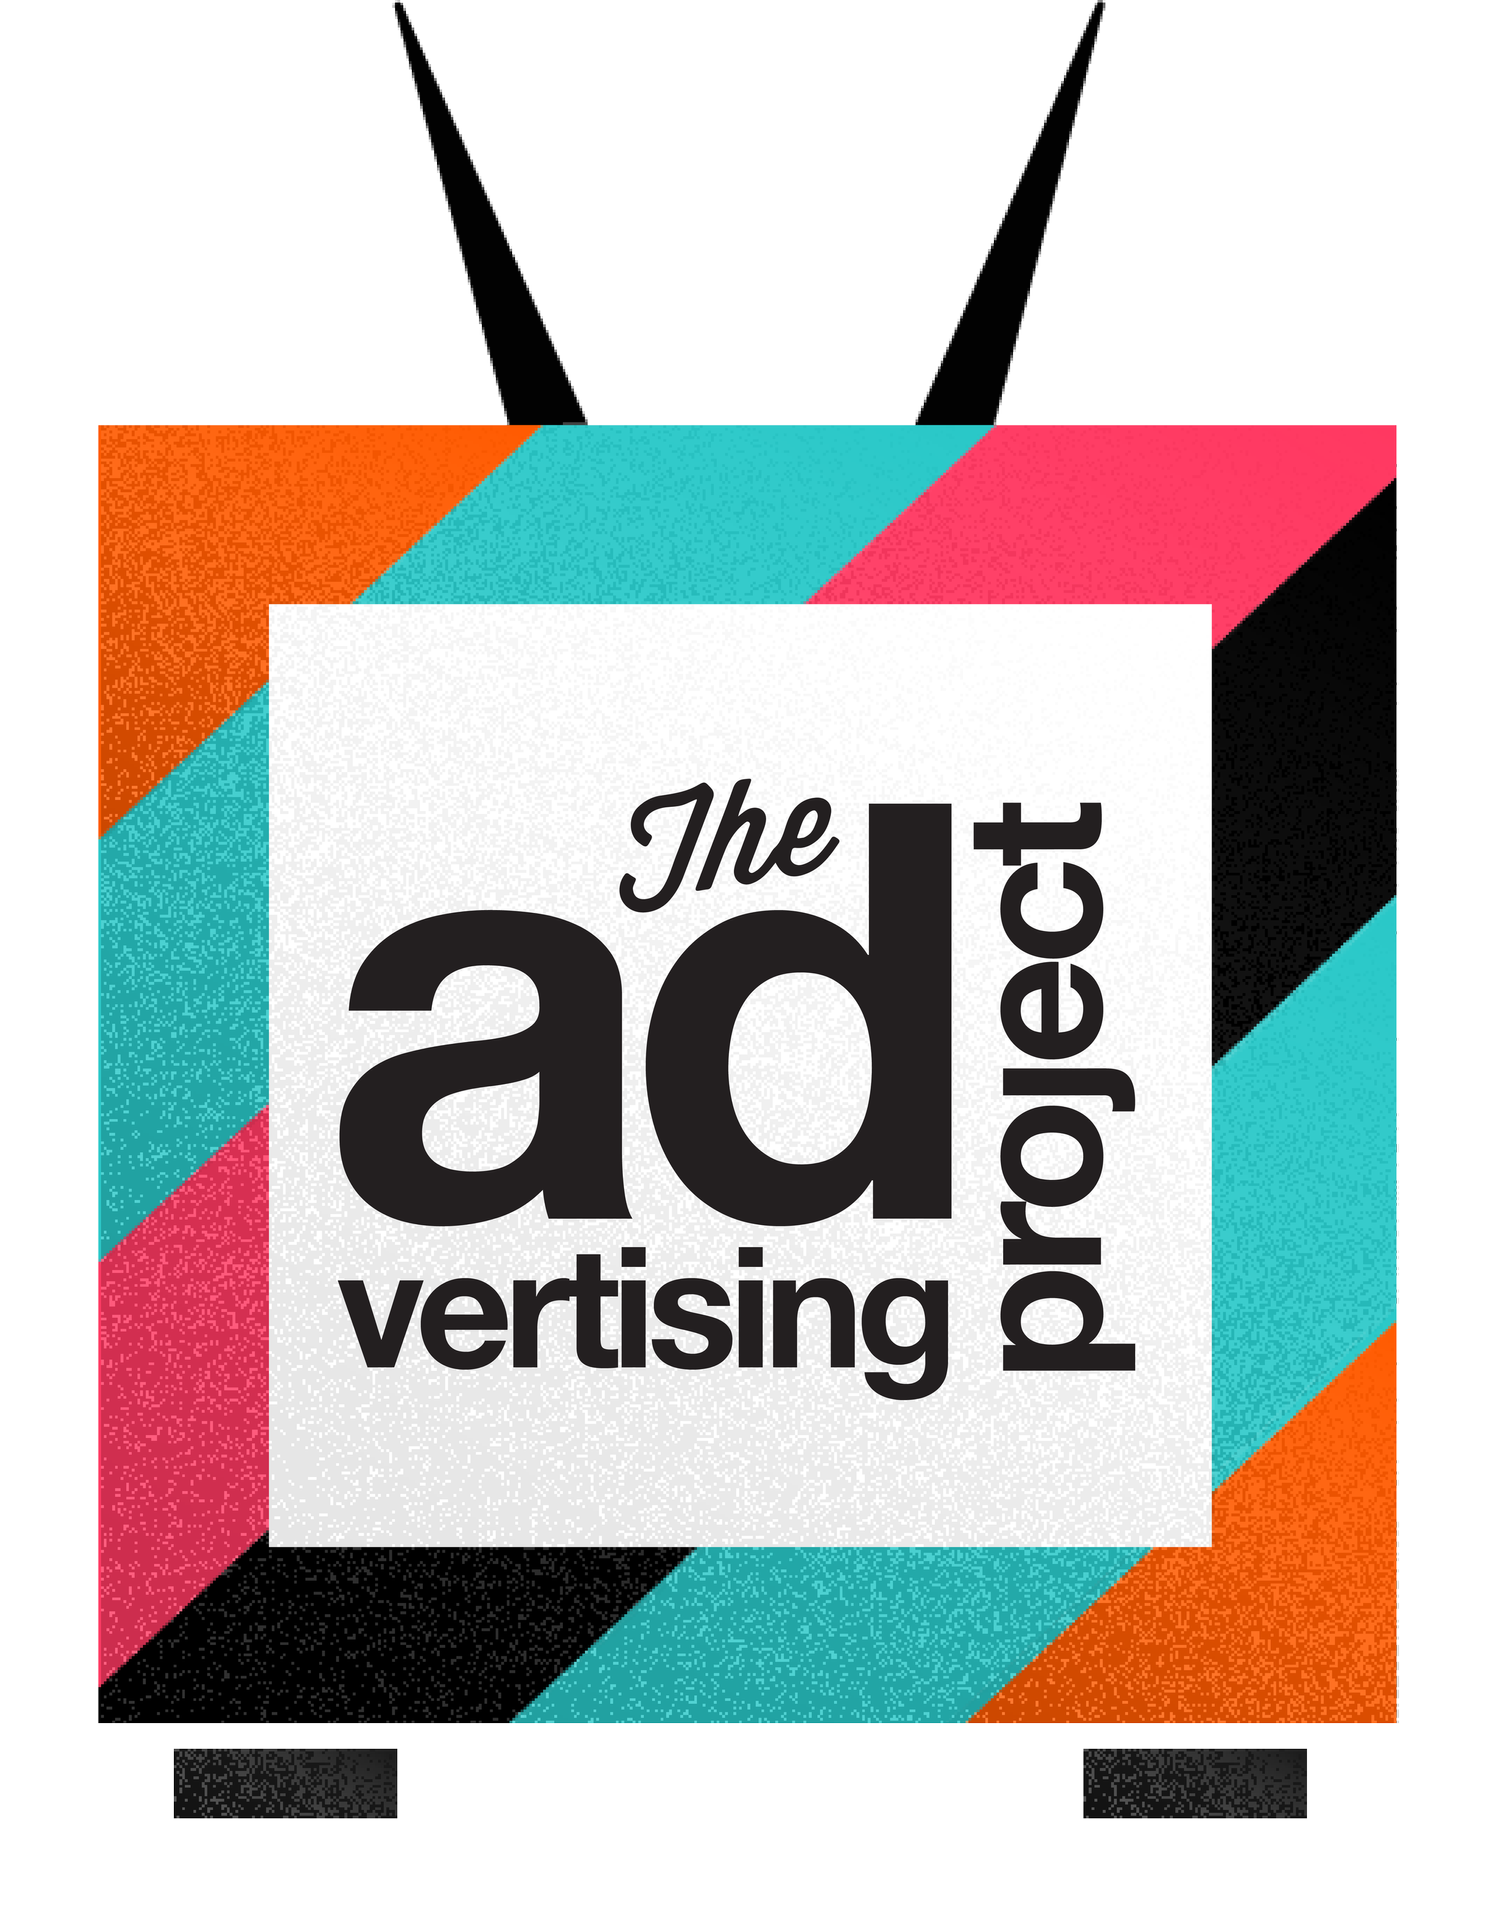 The Advertising Project